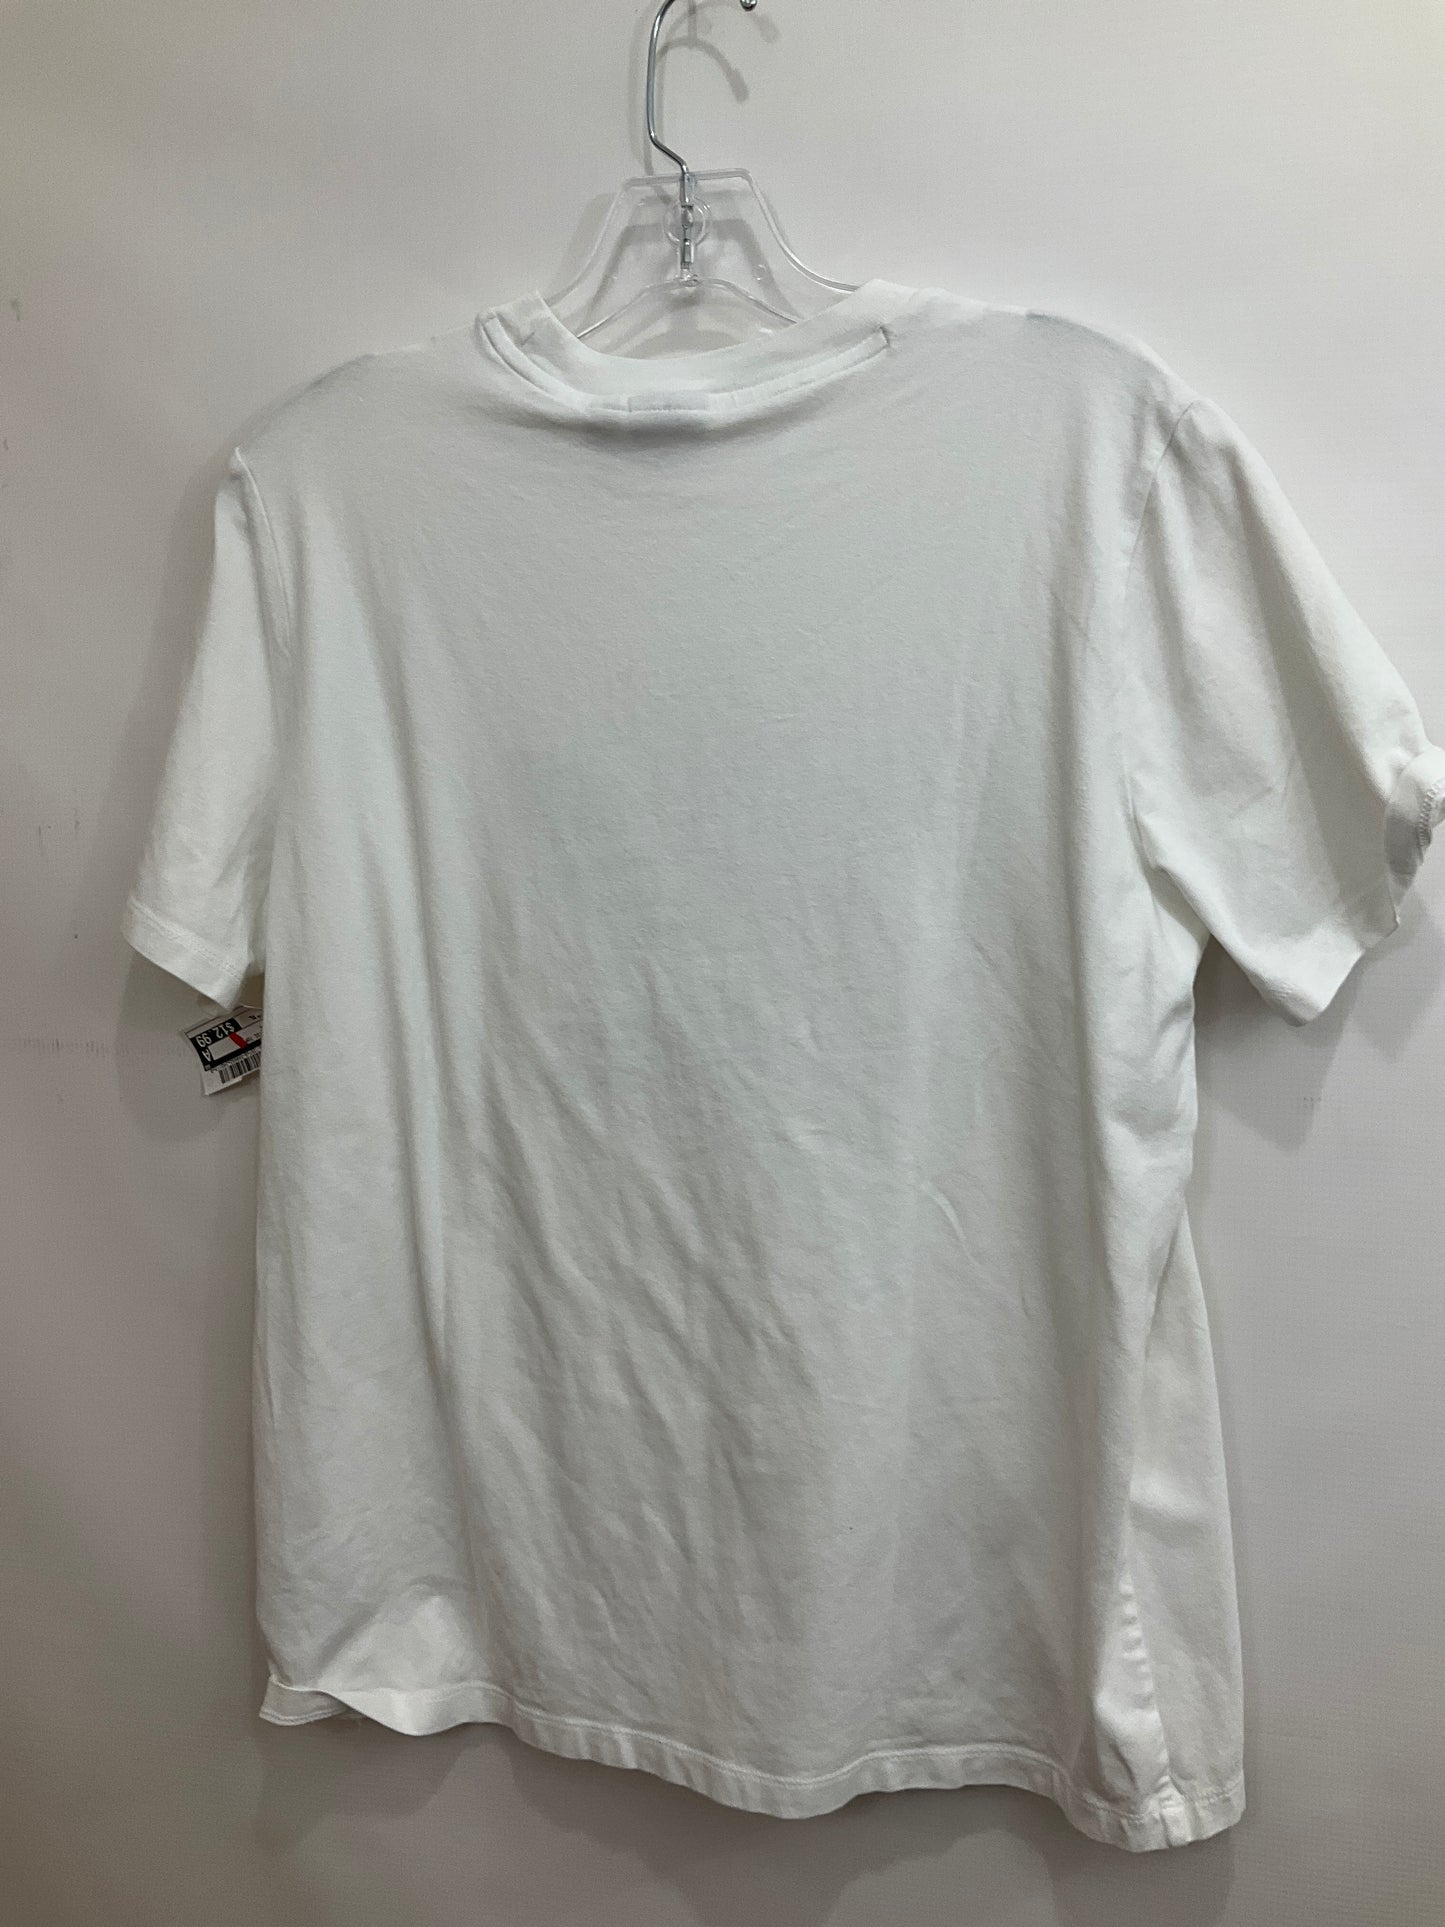 Athletic Top Short Sleeve By Adidas  Size: Xl